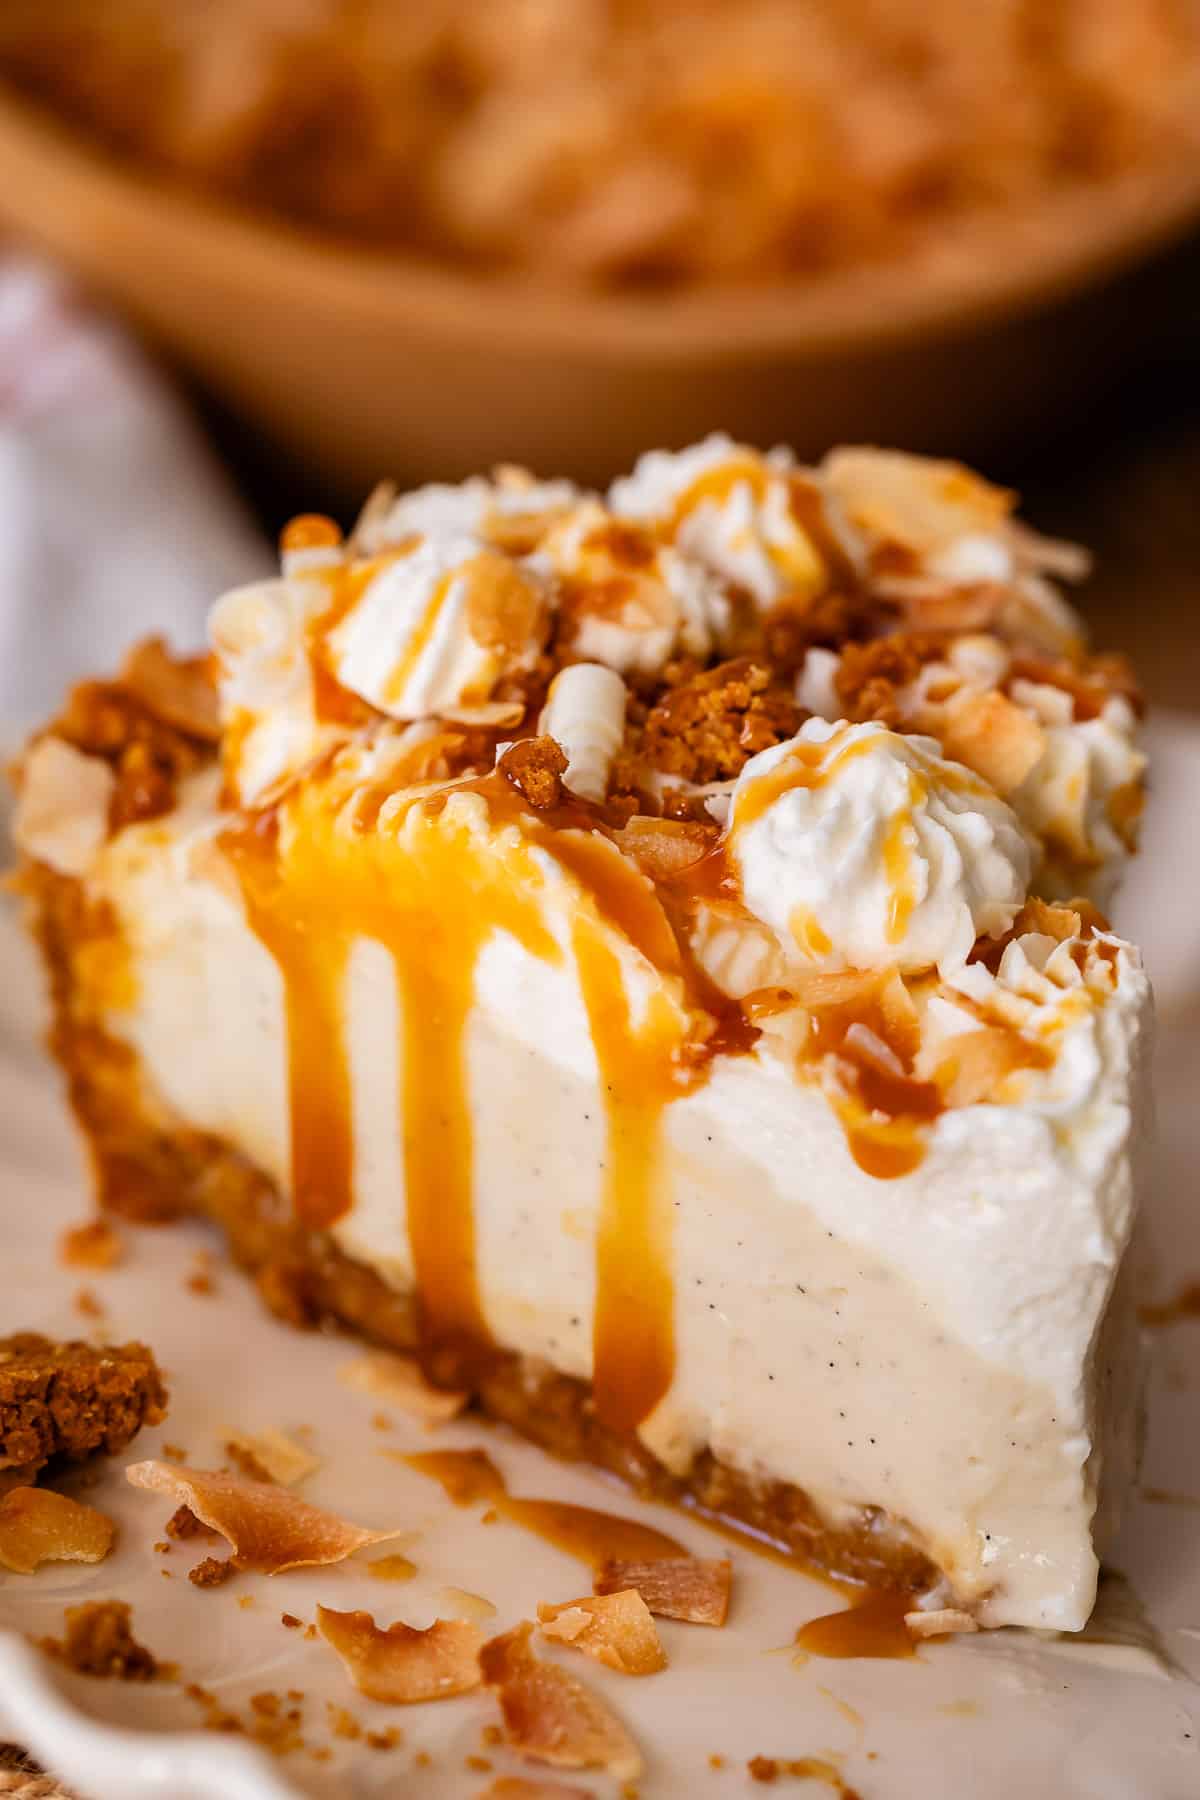 perfecltly sliced piece of coconut cream pie with whipped cream and caramel dripping down the side.